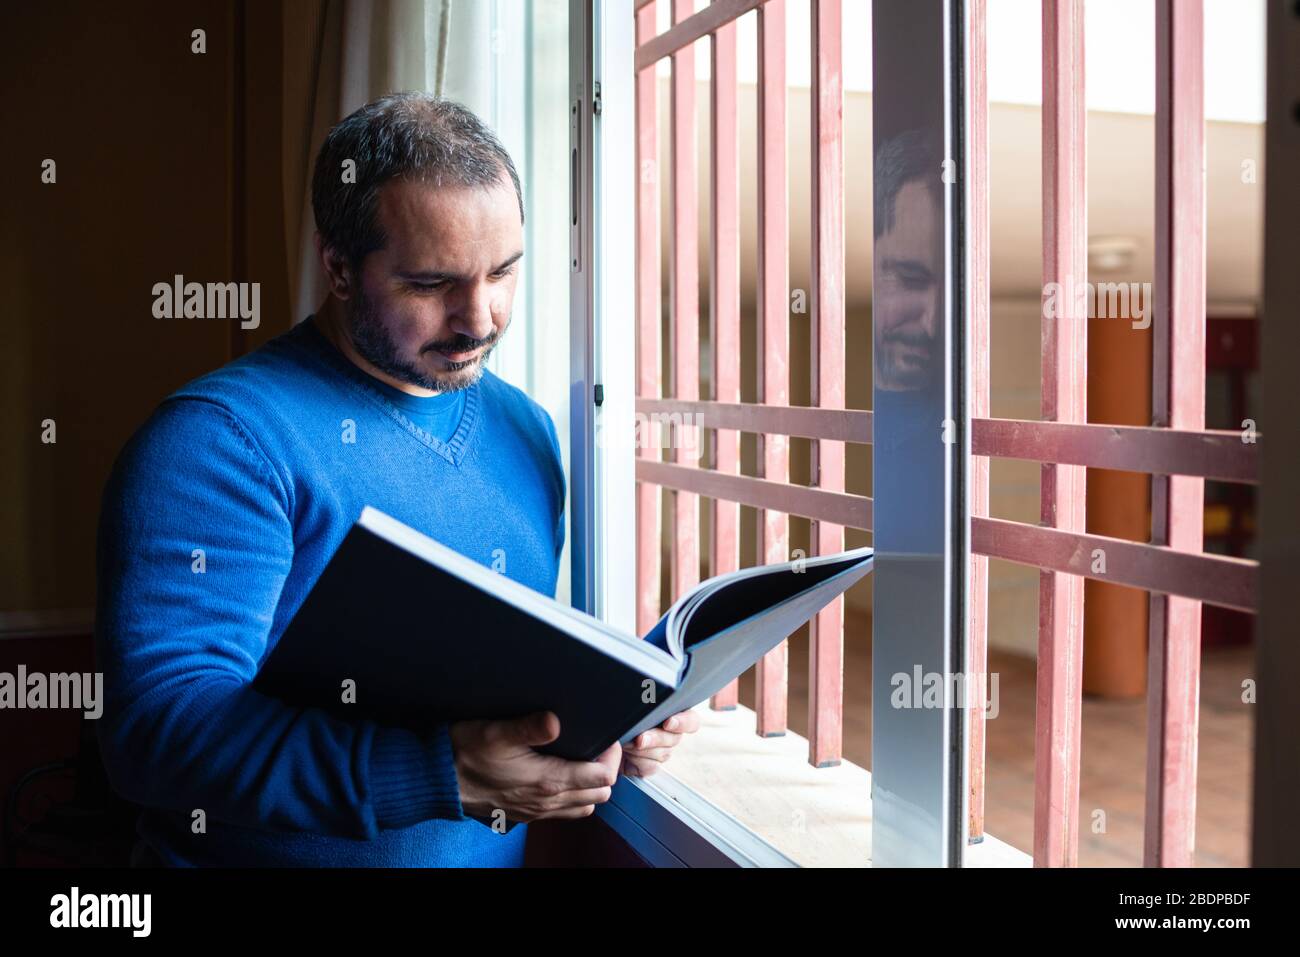 man reading a book by the window dunring quarantine Stock Photo